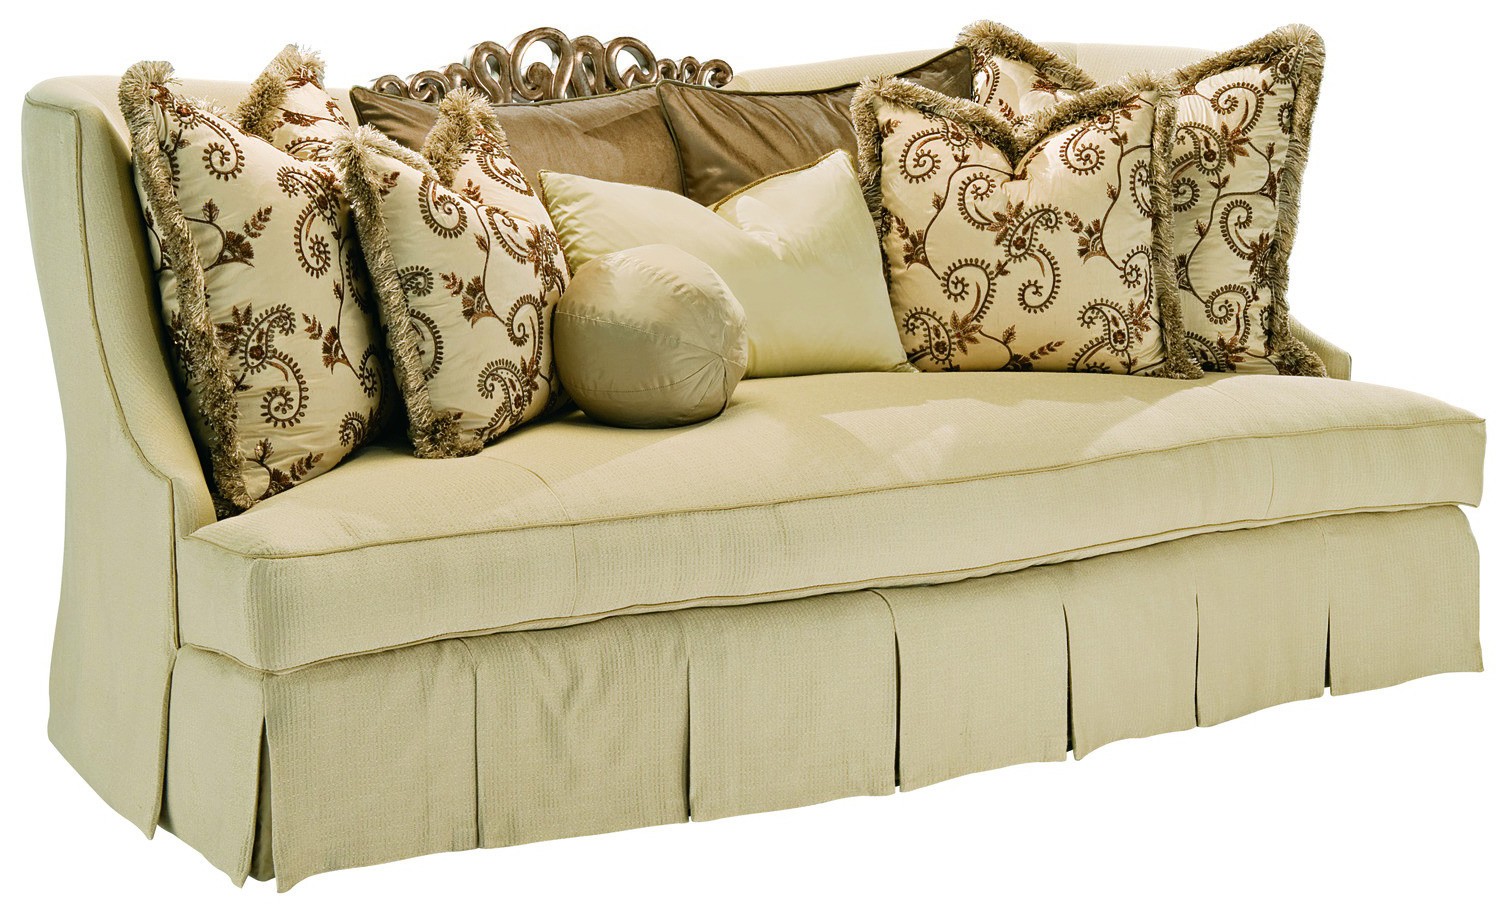 SOFA, COUCH & LOVESEAT Sofa in a lux cream fabric with hand carved wooden details